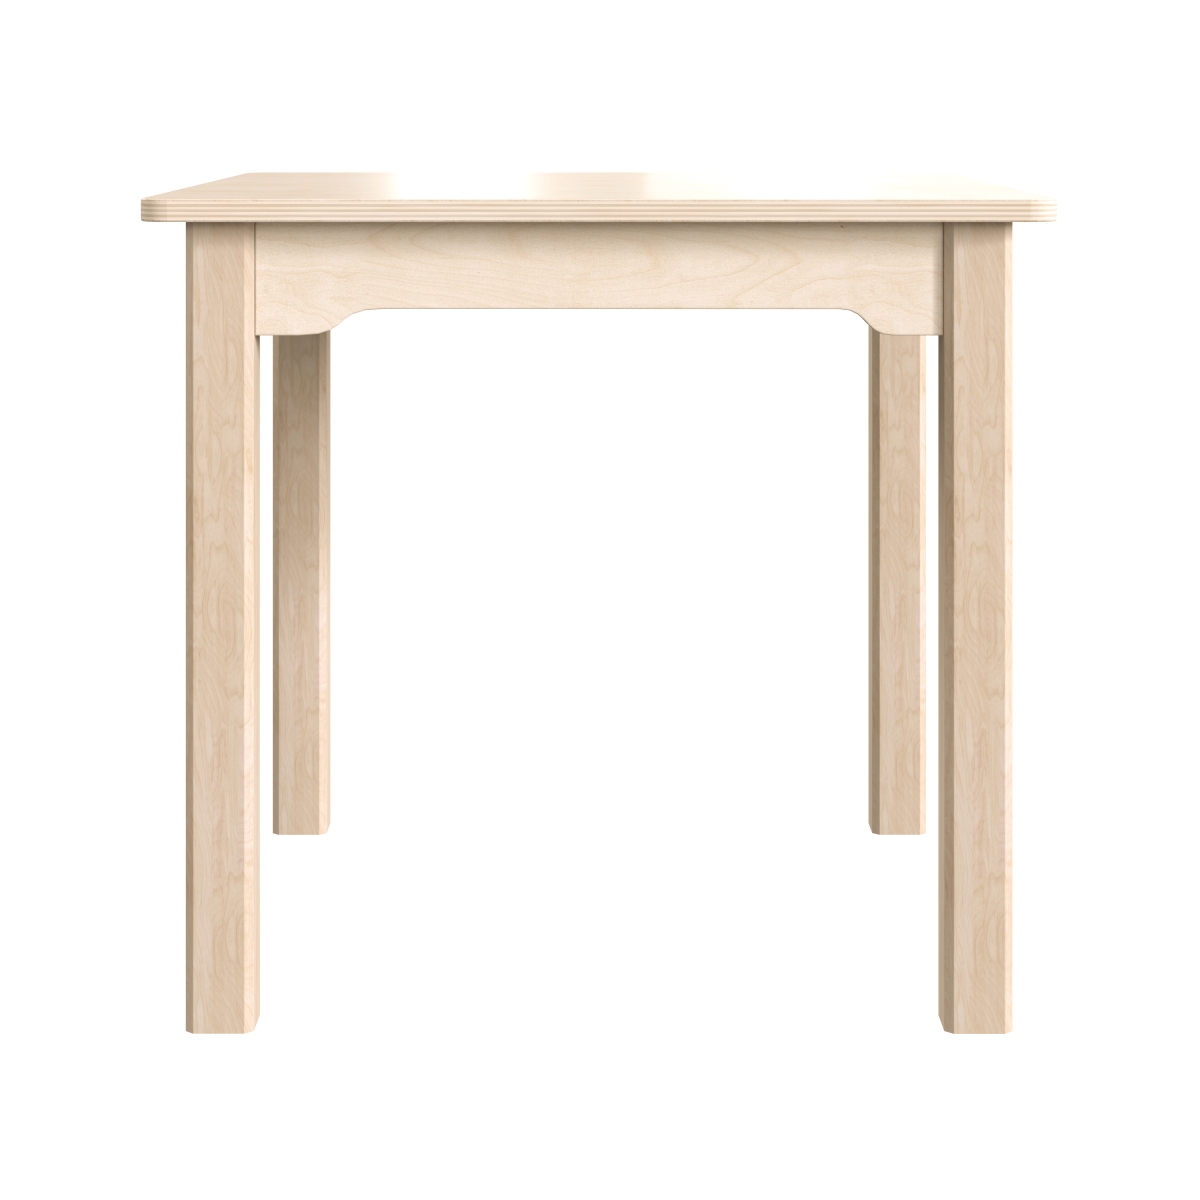 Picture of Flash Furniture MK-ME088009-GG 23.5 x 21.25 in. Bright Beginnings Commercial Grade Wooden Square Preschool Classroom Activity Table, Beech